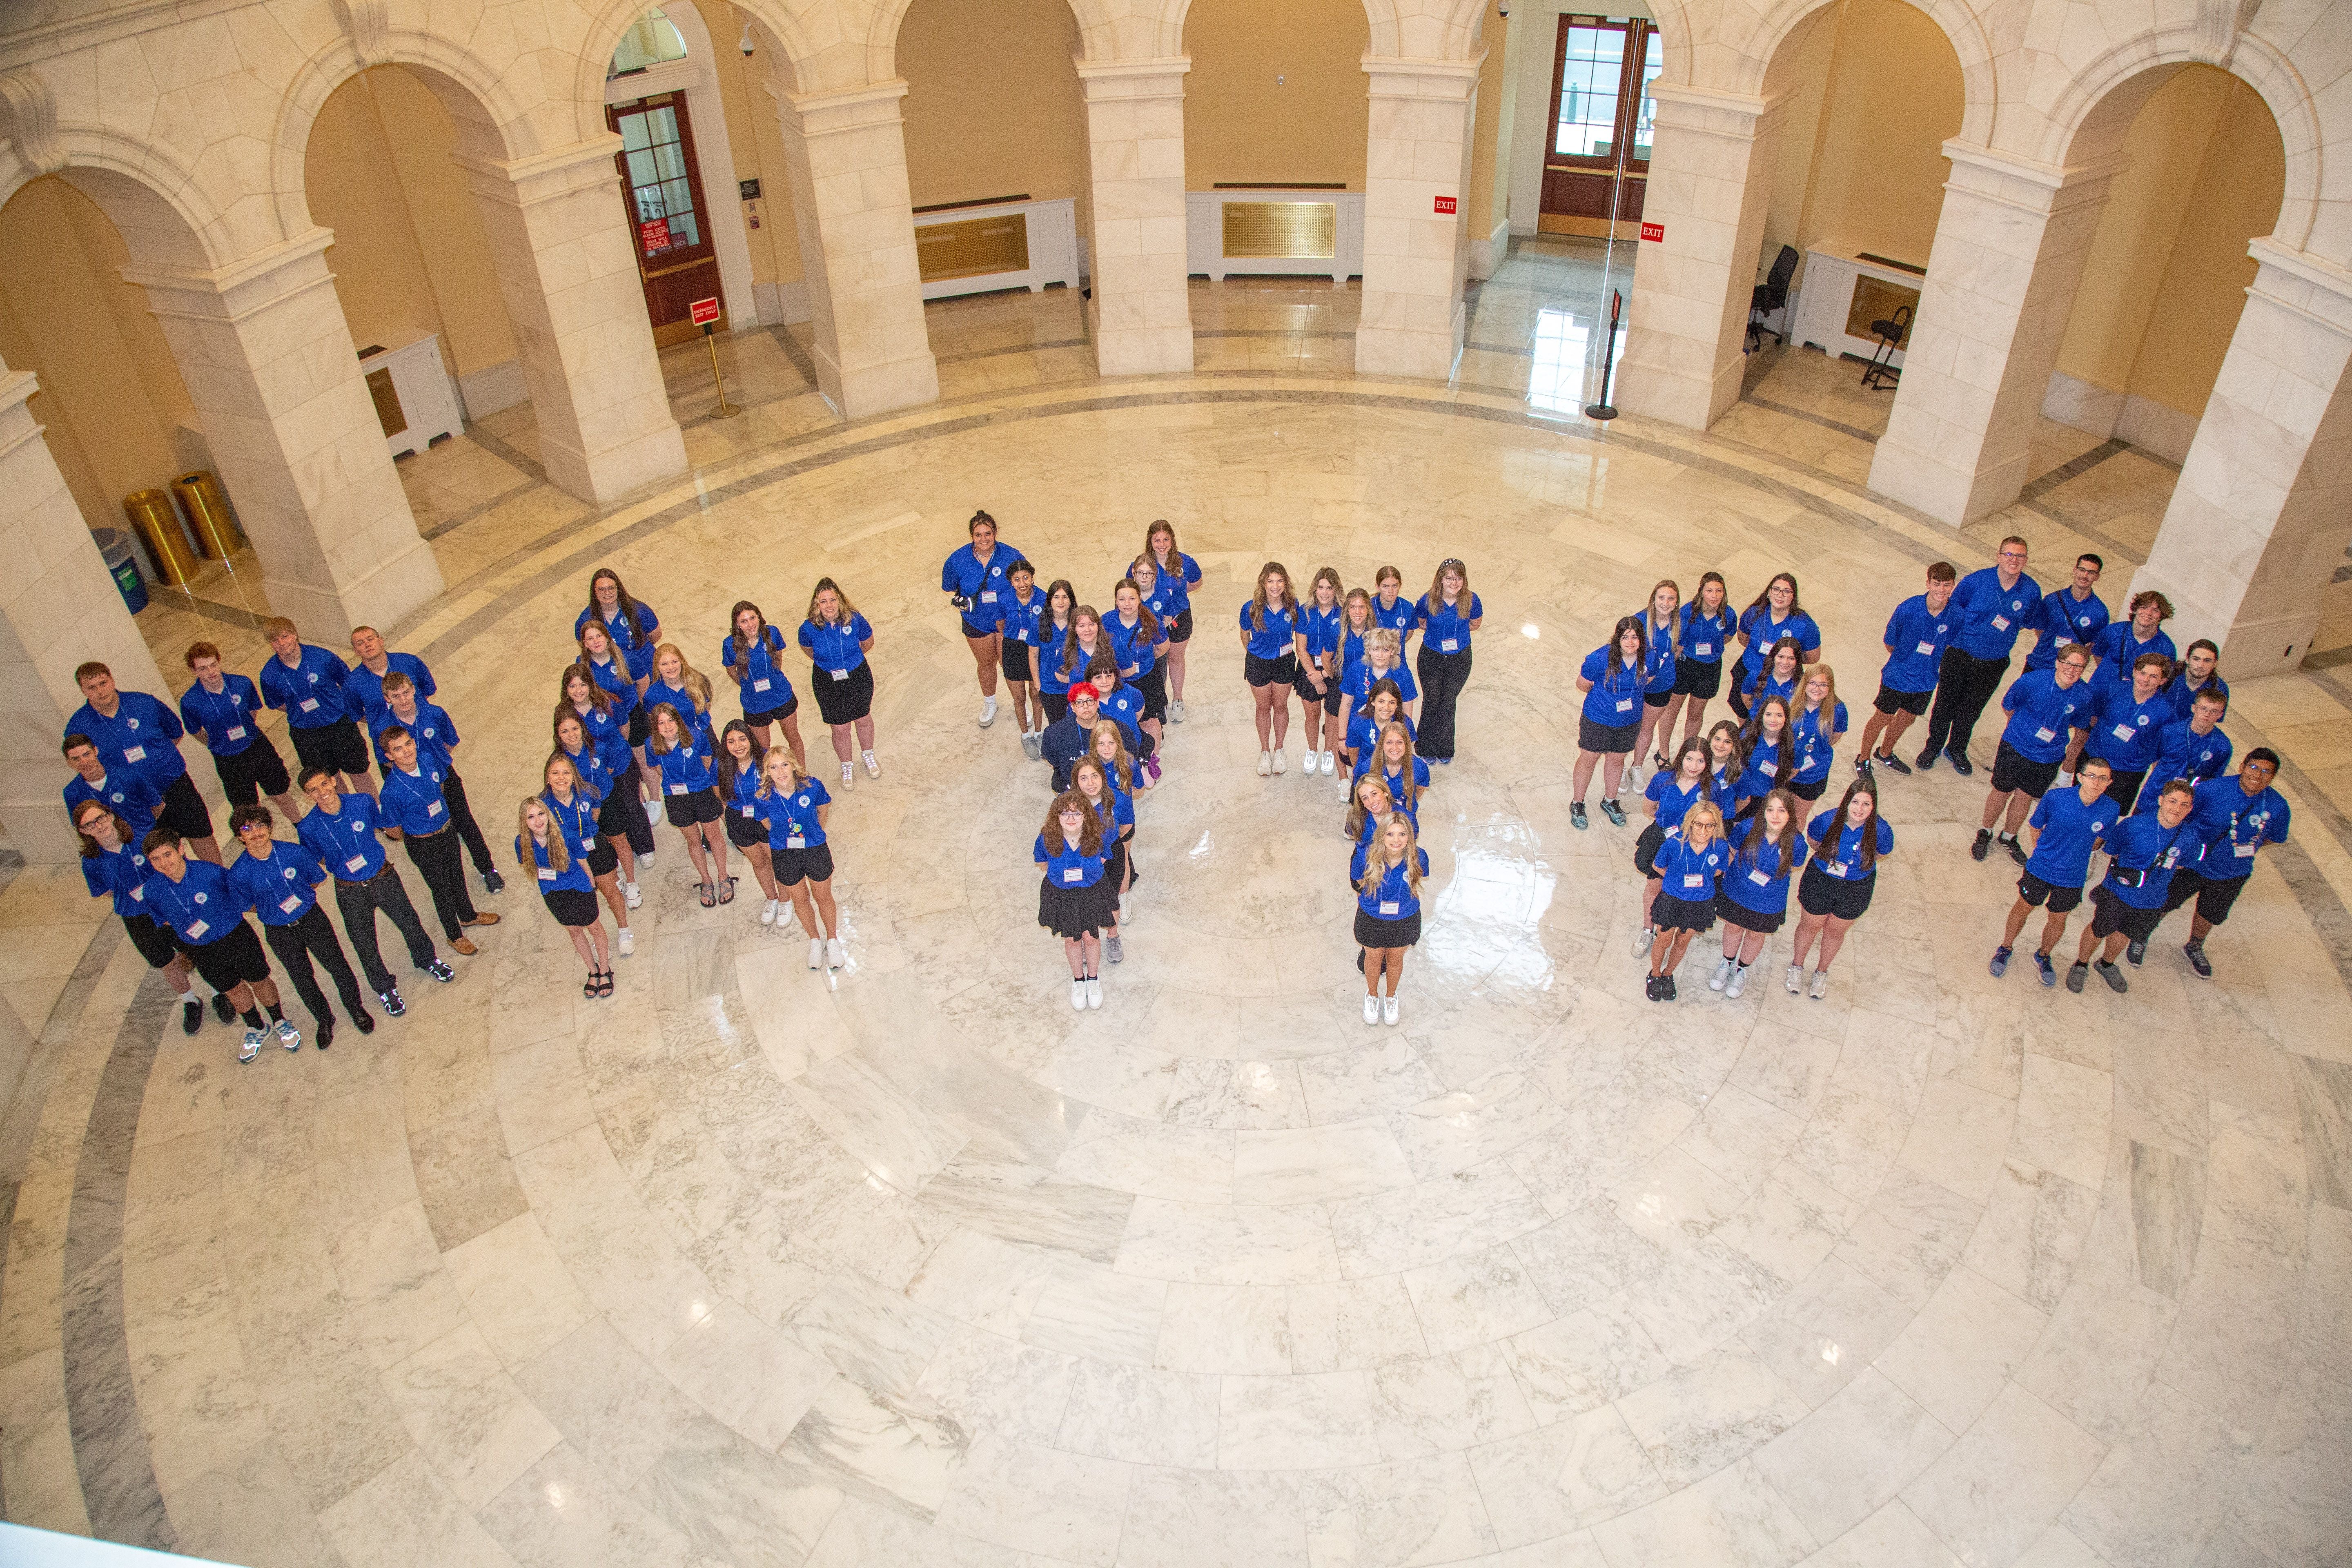 Participants shot from above spelling out OKYT23 in the gallery of the U.S. Capitol building..